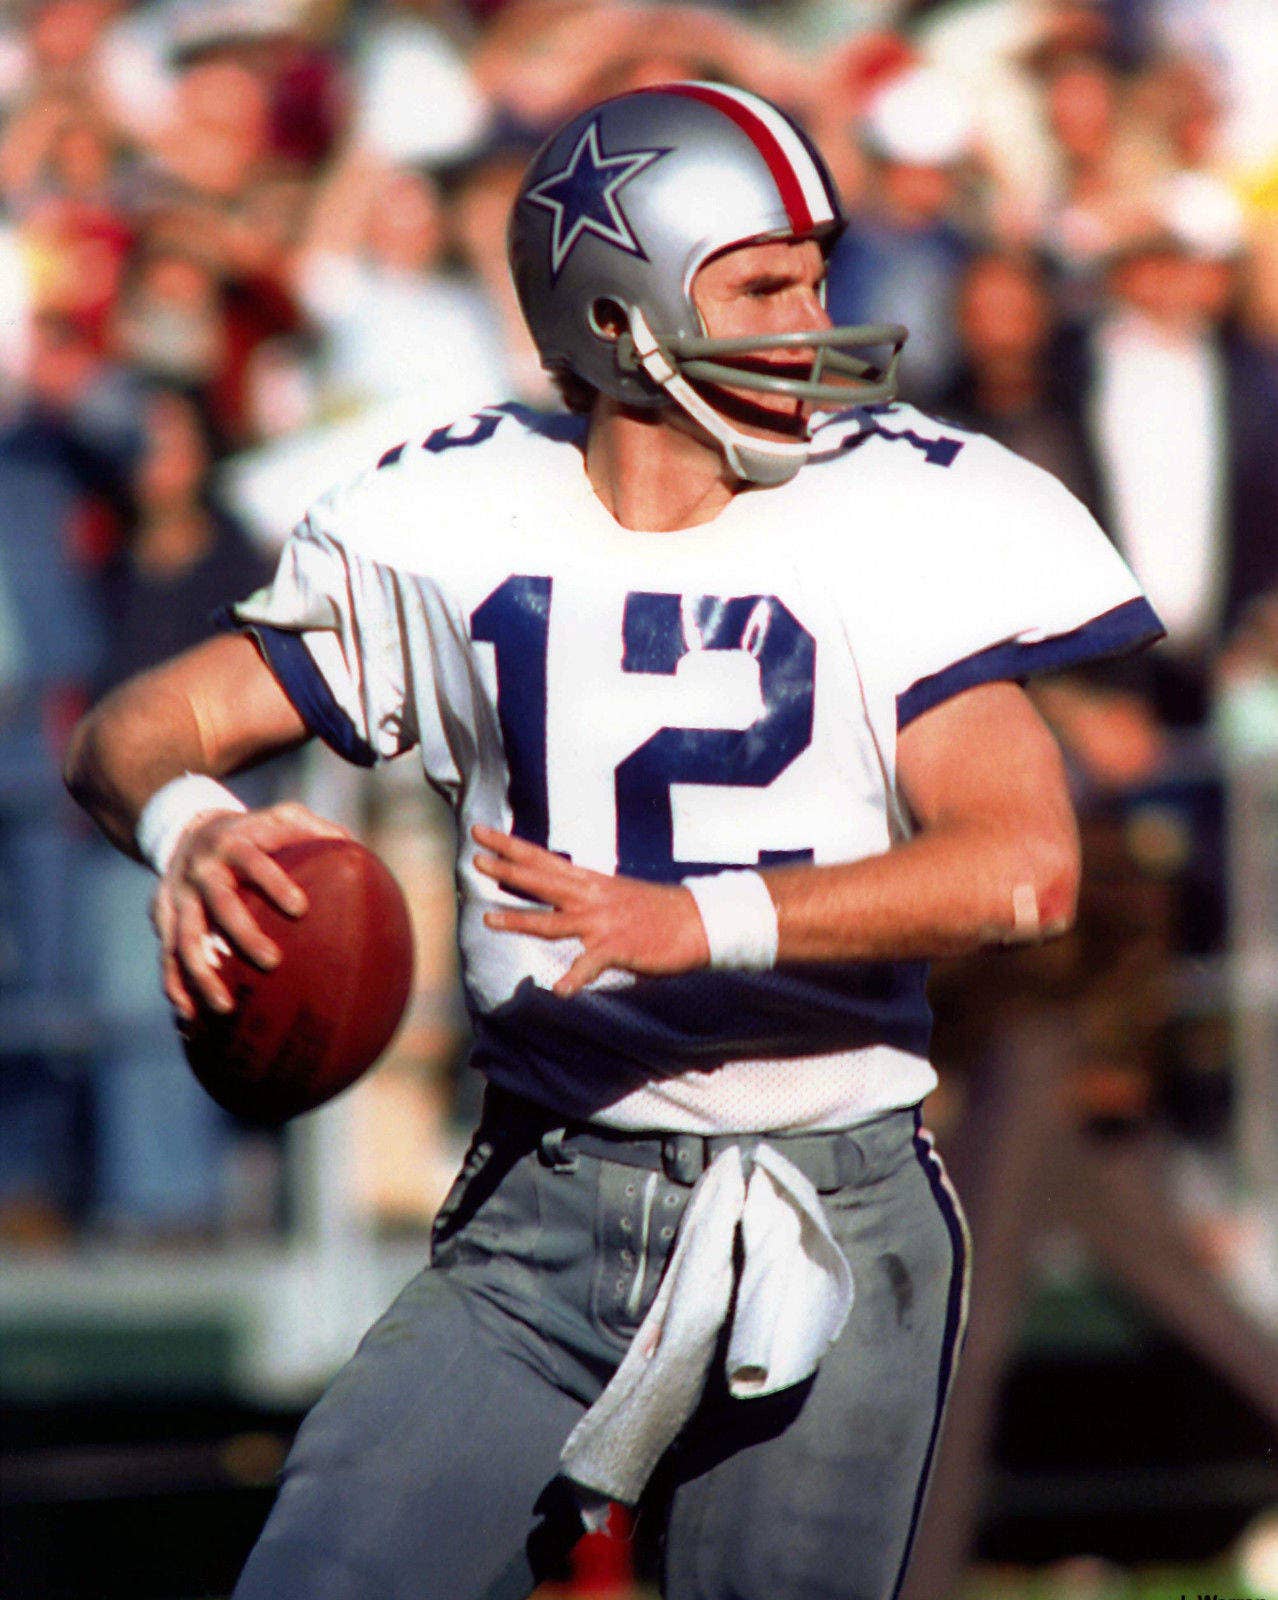 Dallas Cowboys Hall of Fame quarterback Roger Staubach, who threw for 153 TDs in a career that came after service in the United States Navy that included a tour in Vietnam. (Photo from Wikimedia Commons)